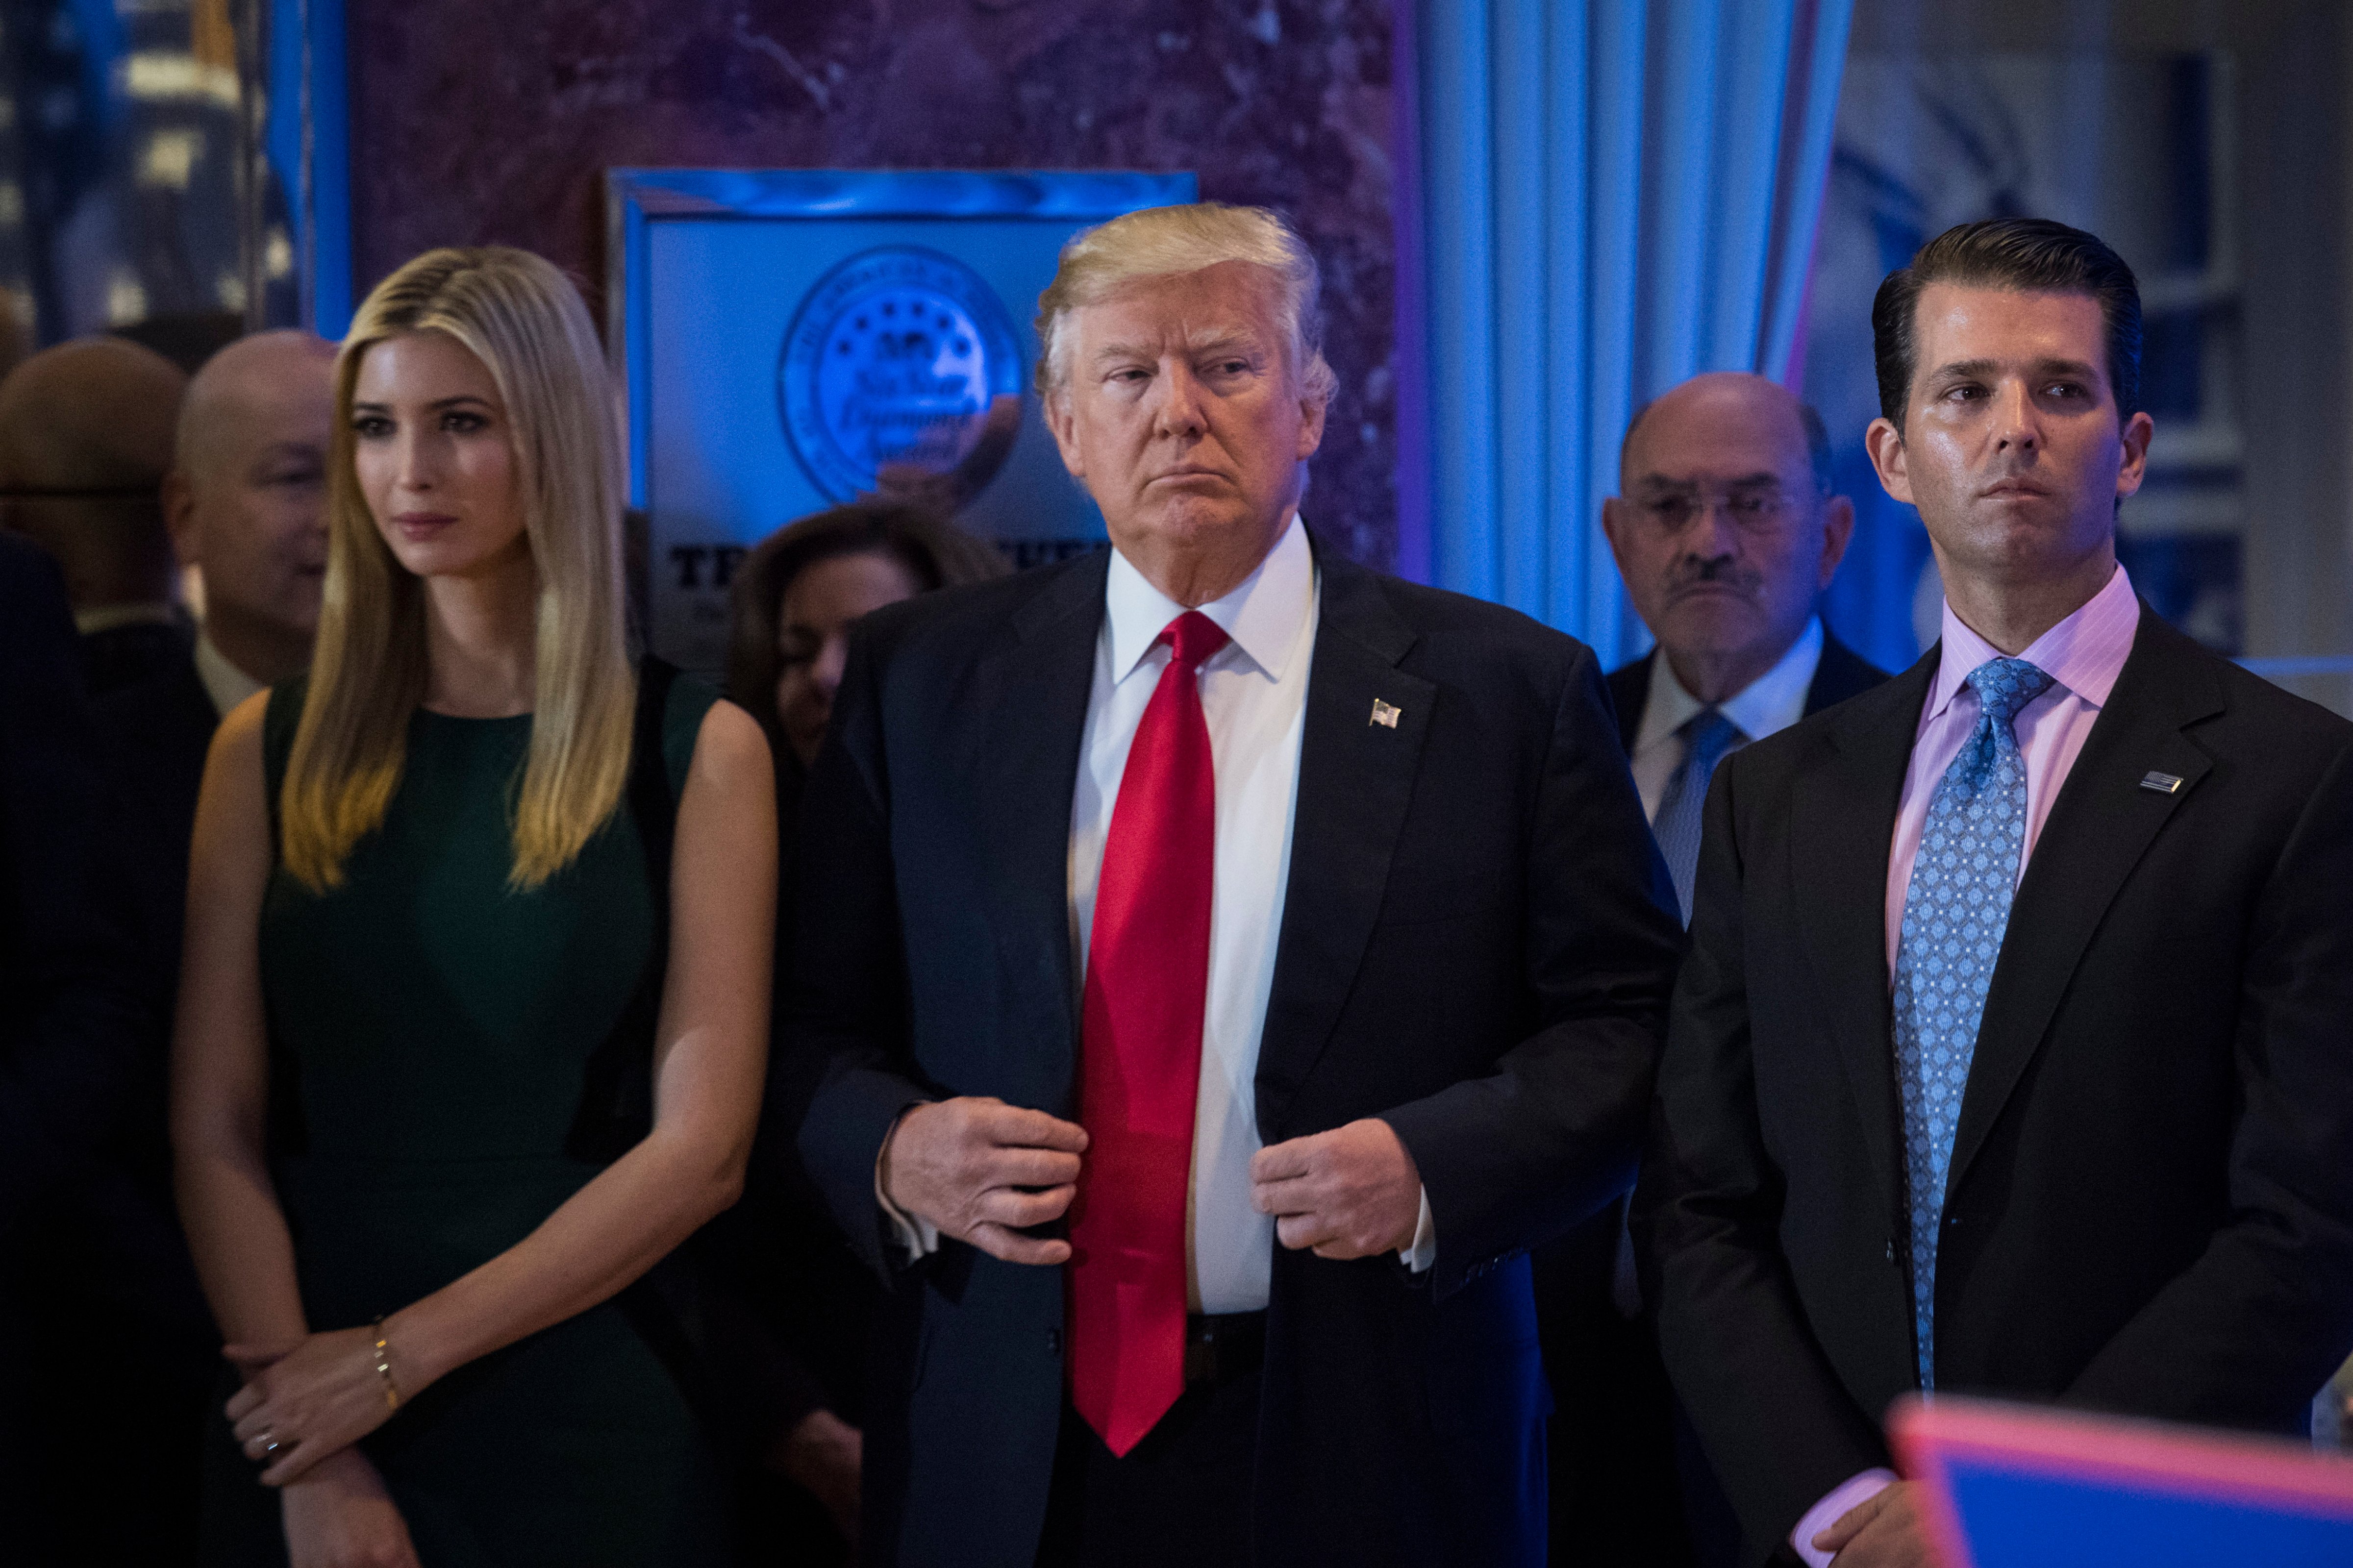 President-elect Donald Trump, Ivanka Trump, and Donald Trump Jr., listen during a press conference at Trump Tower in New York, NY on Wednesday, Jan. 11, 2017. (Jabin Botsford&mdash;The Washington Post/Getty Images)